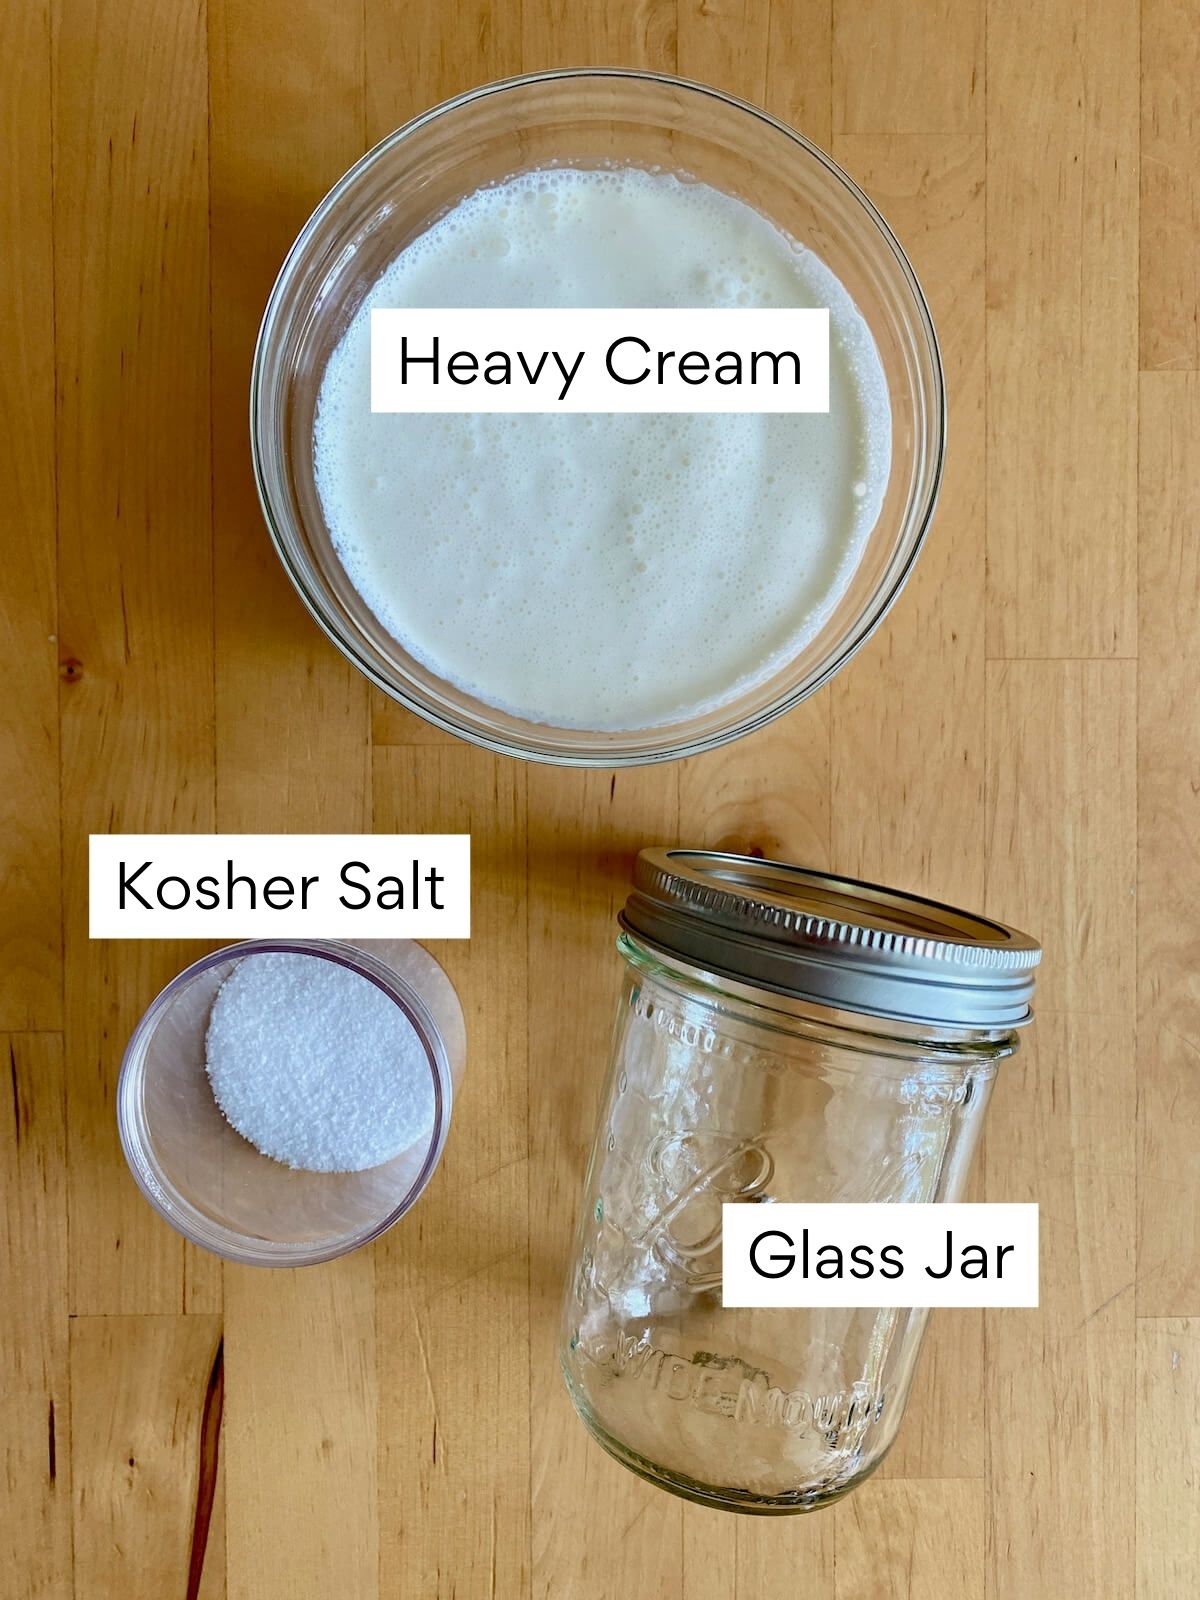 The ingredients to make homemade butter in a jar. Each ingredient is labeled with text. They include heavy cream, kosher salt, and a glass jar.